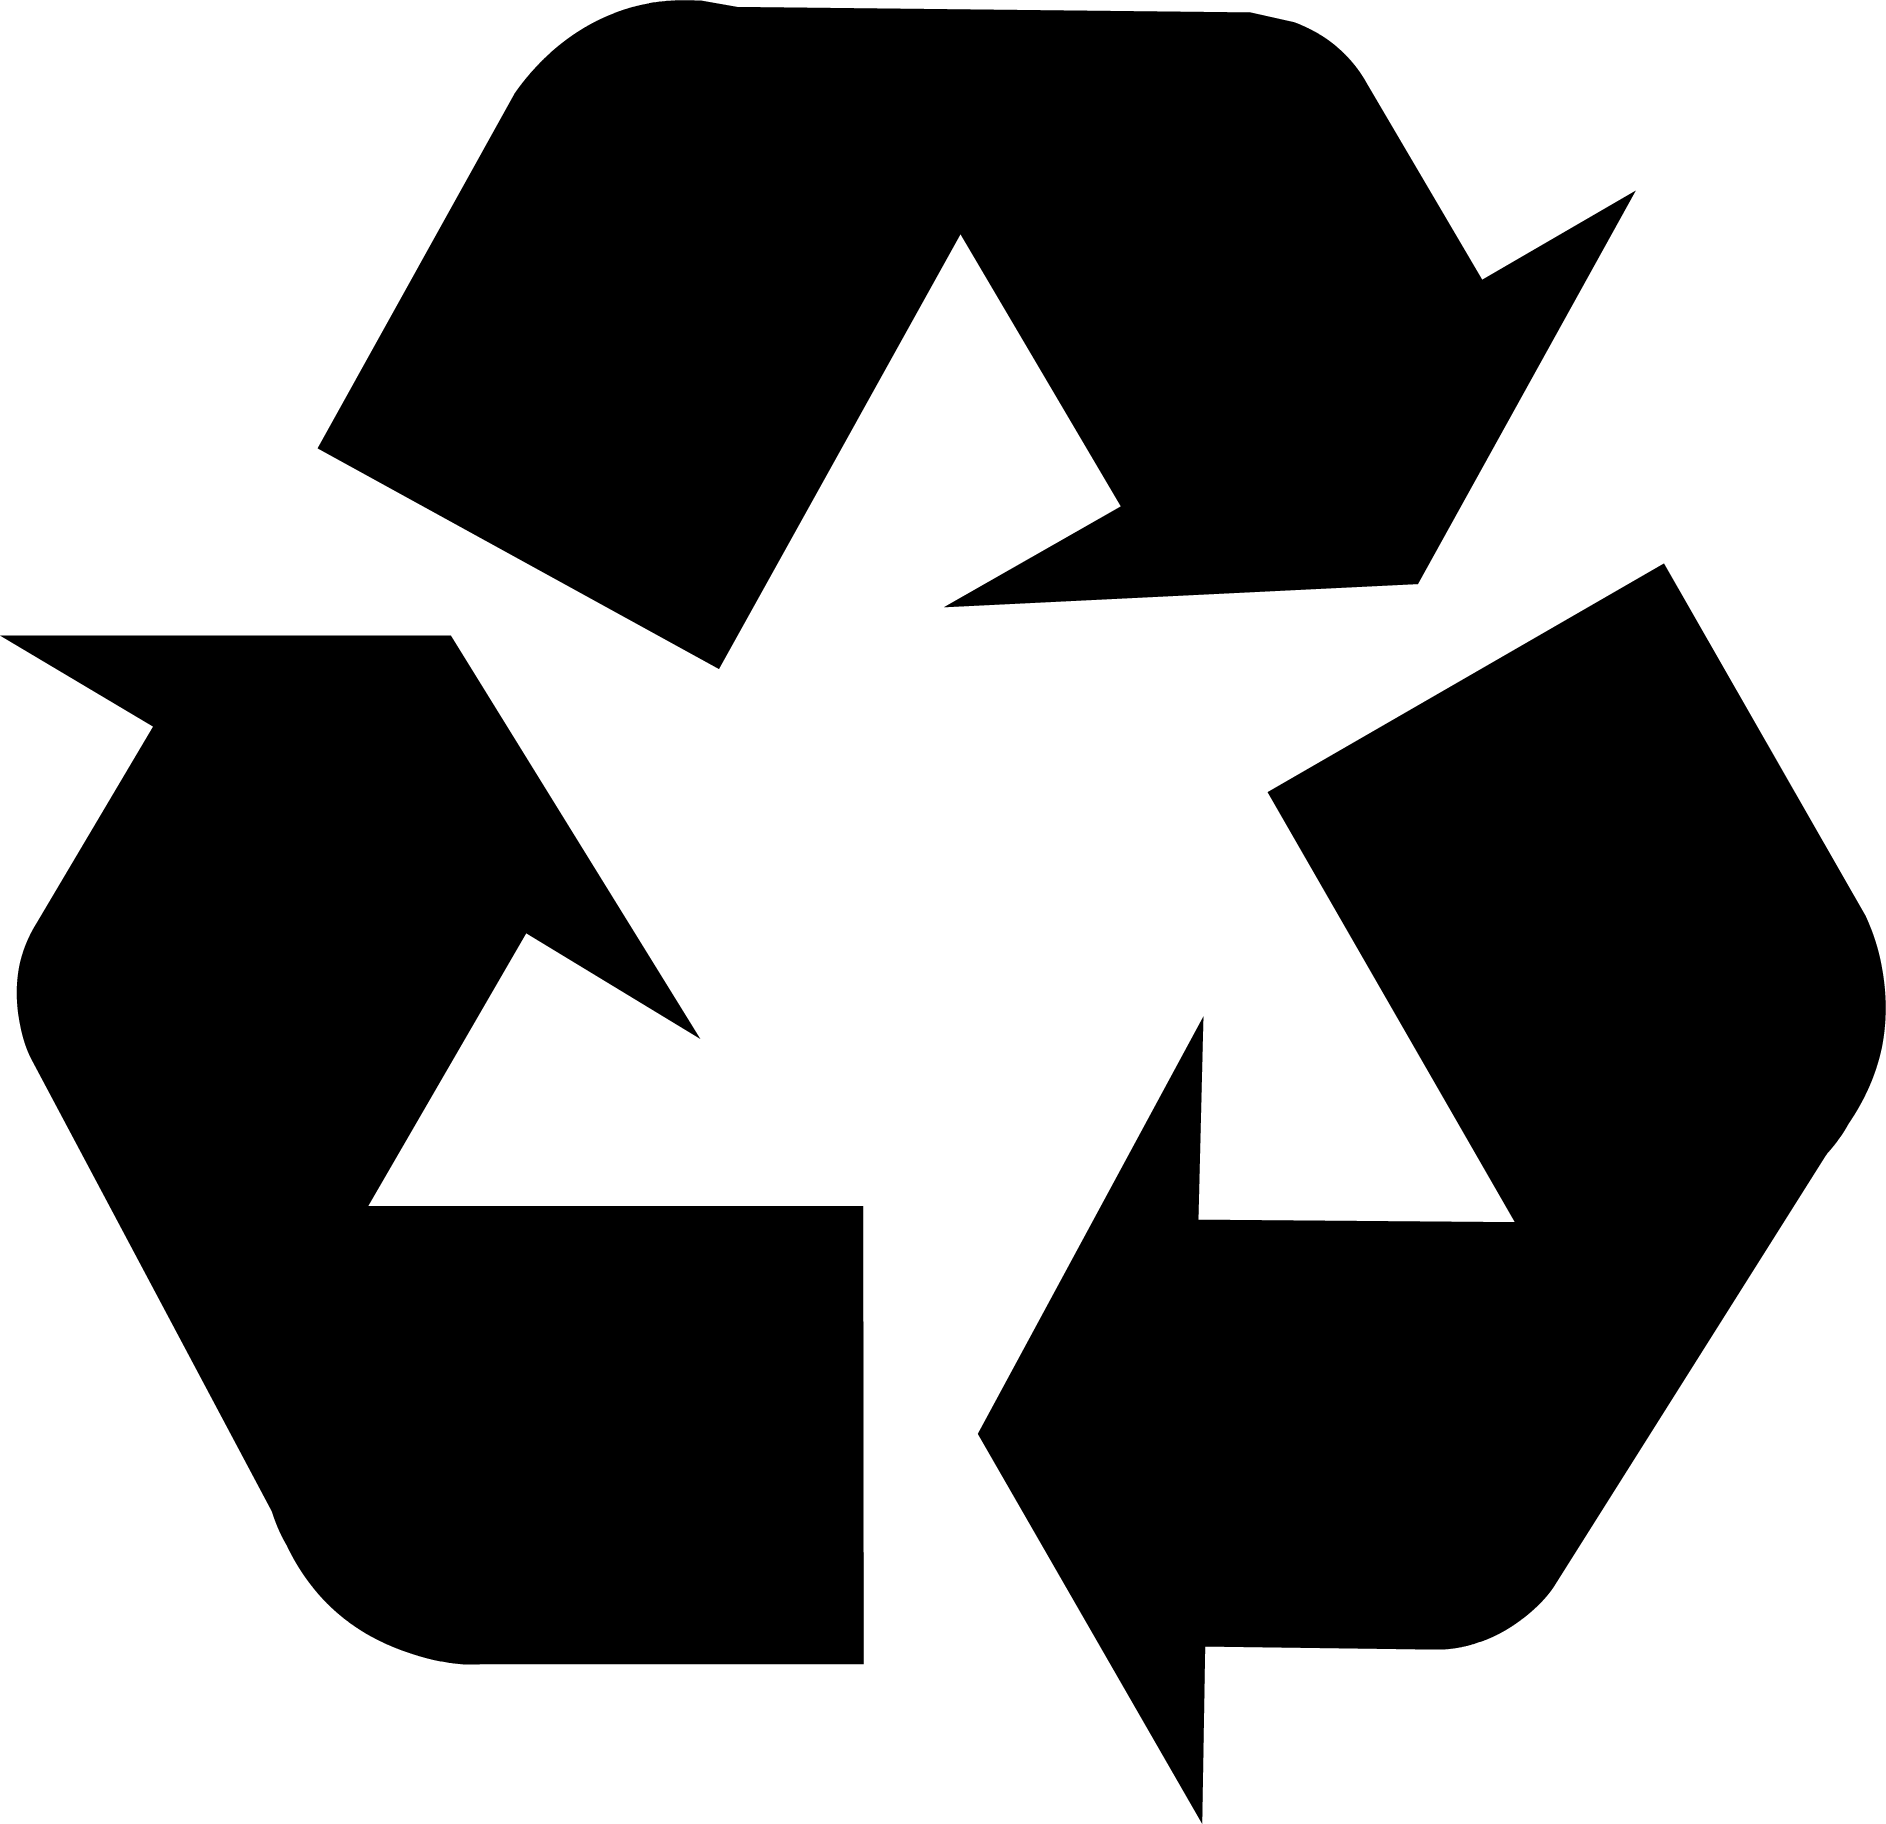 Black and White Vector Logo - Recycling Symbol - Download the Original Recycle Logo